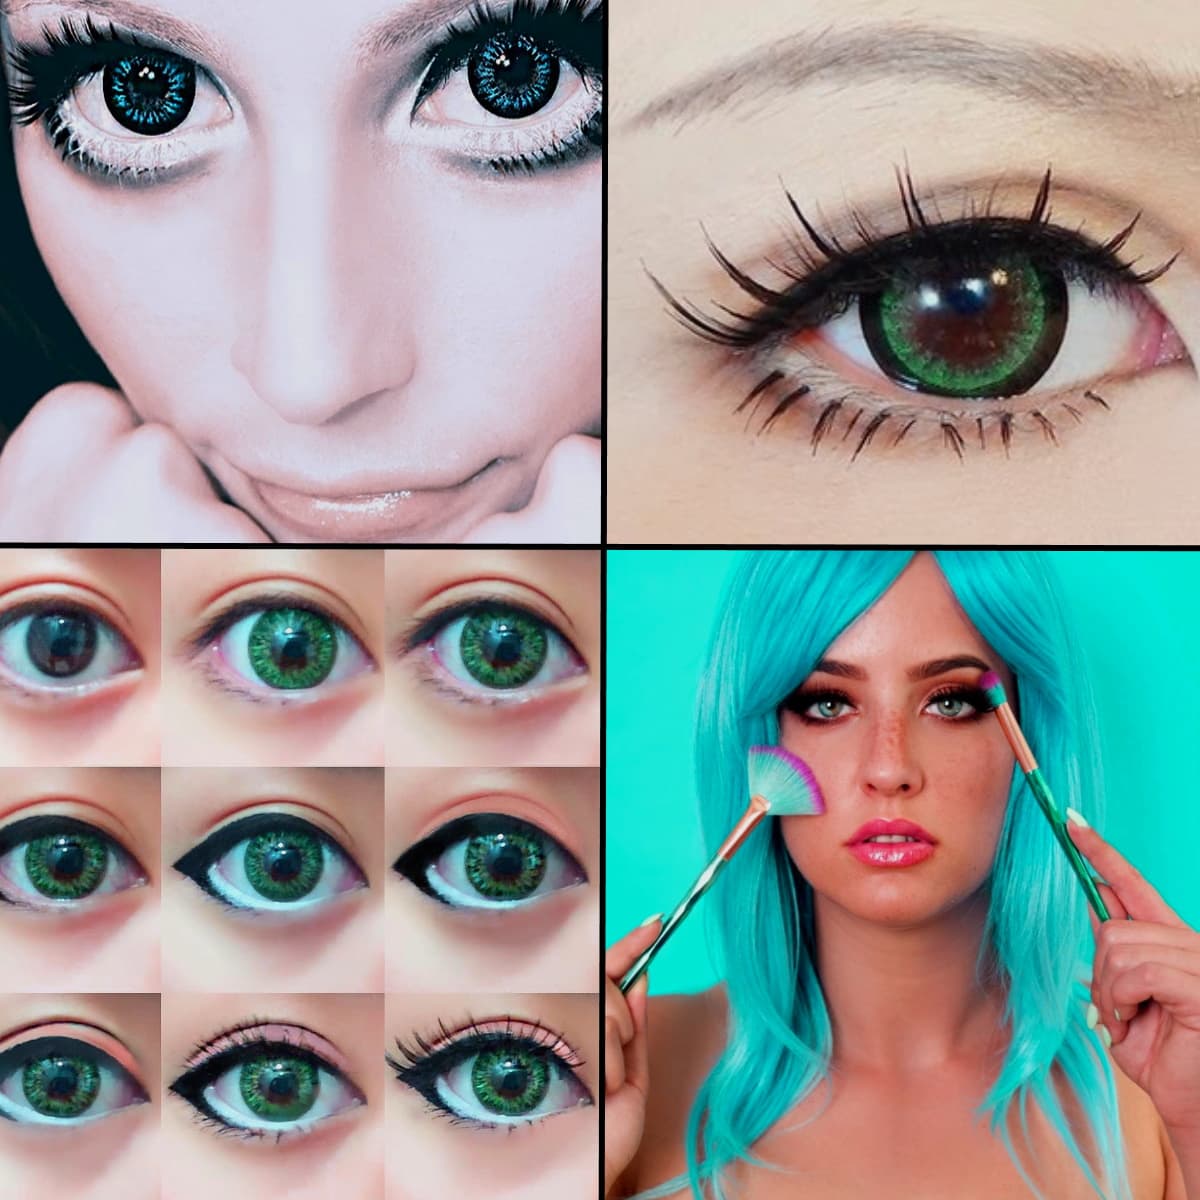 Steps for achieving anime eyes cosplay look